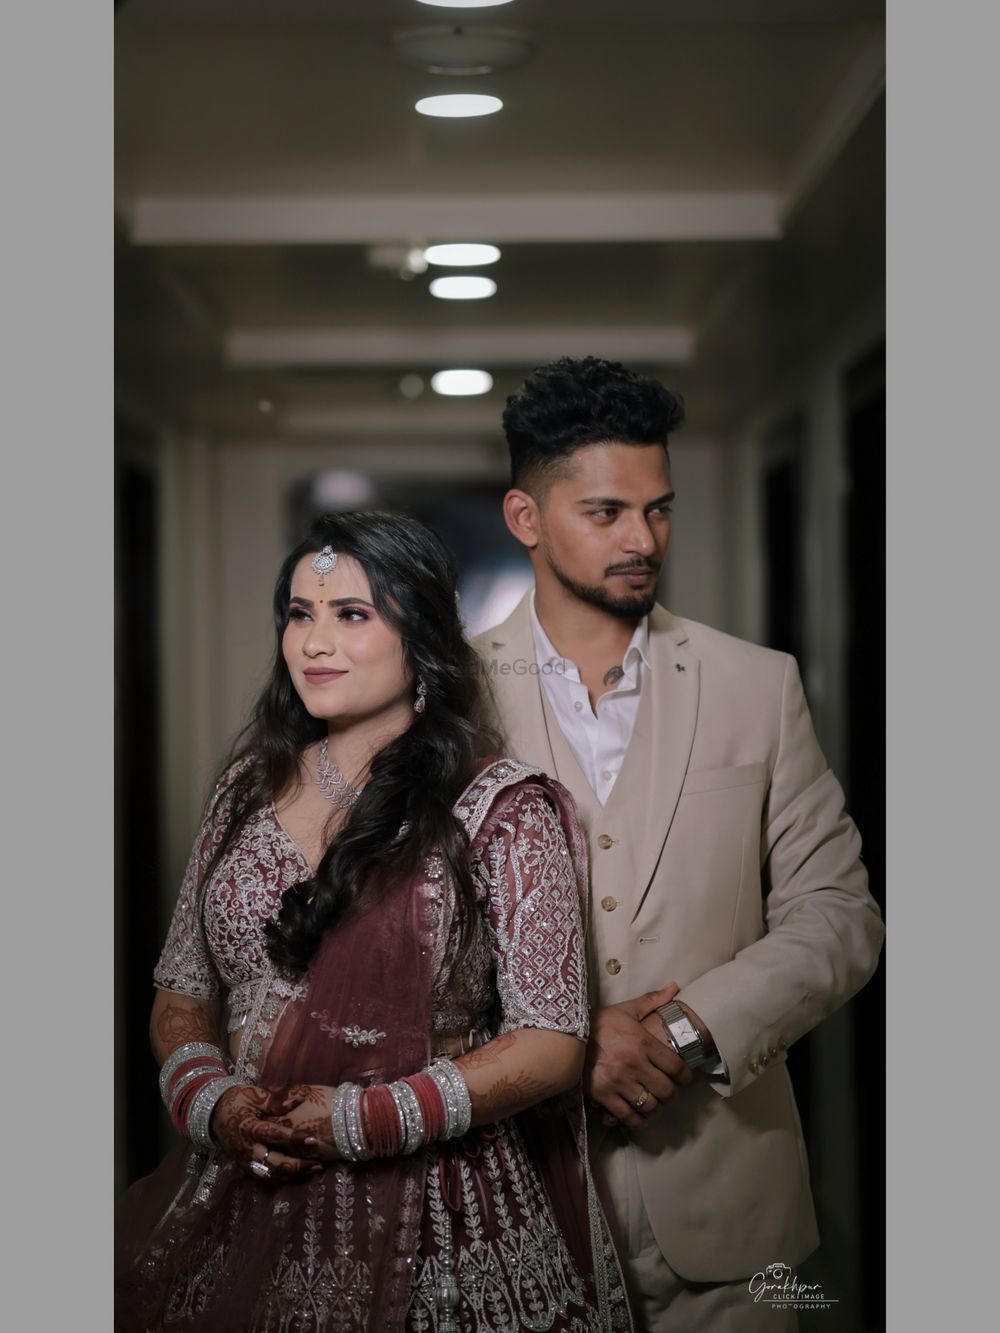 Photo From couple - By Aman Photography